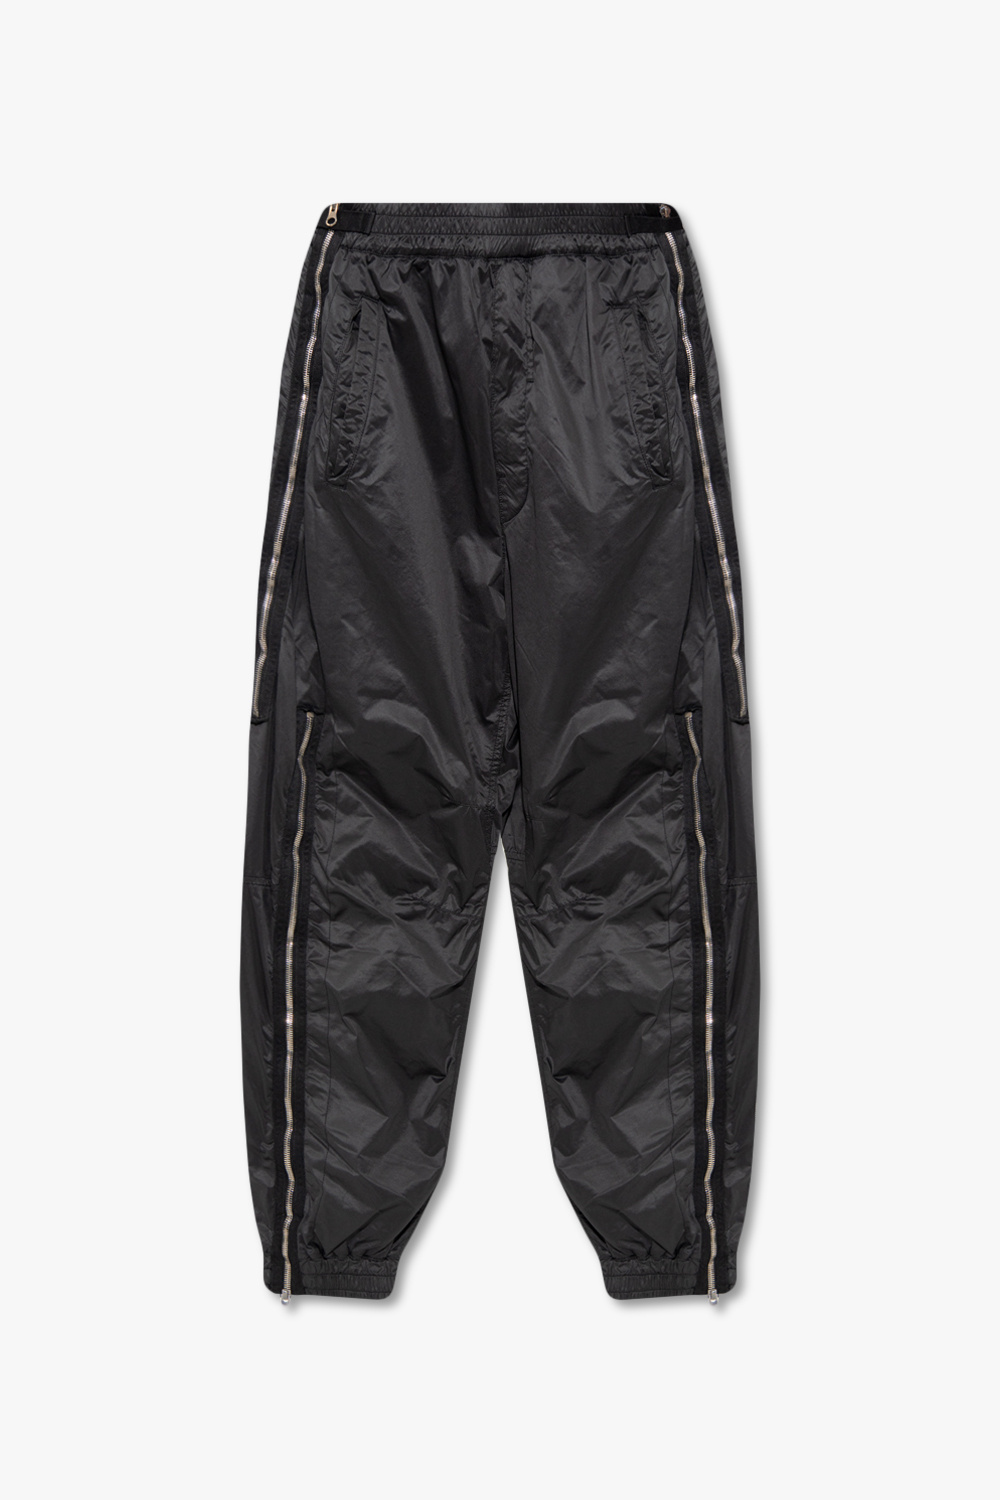 Stone Island Insulated trousers with zips